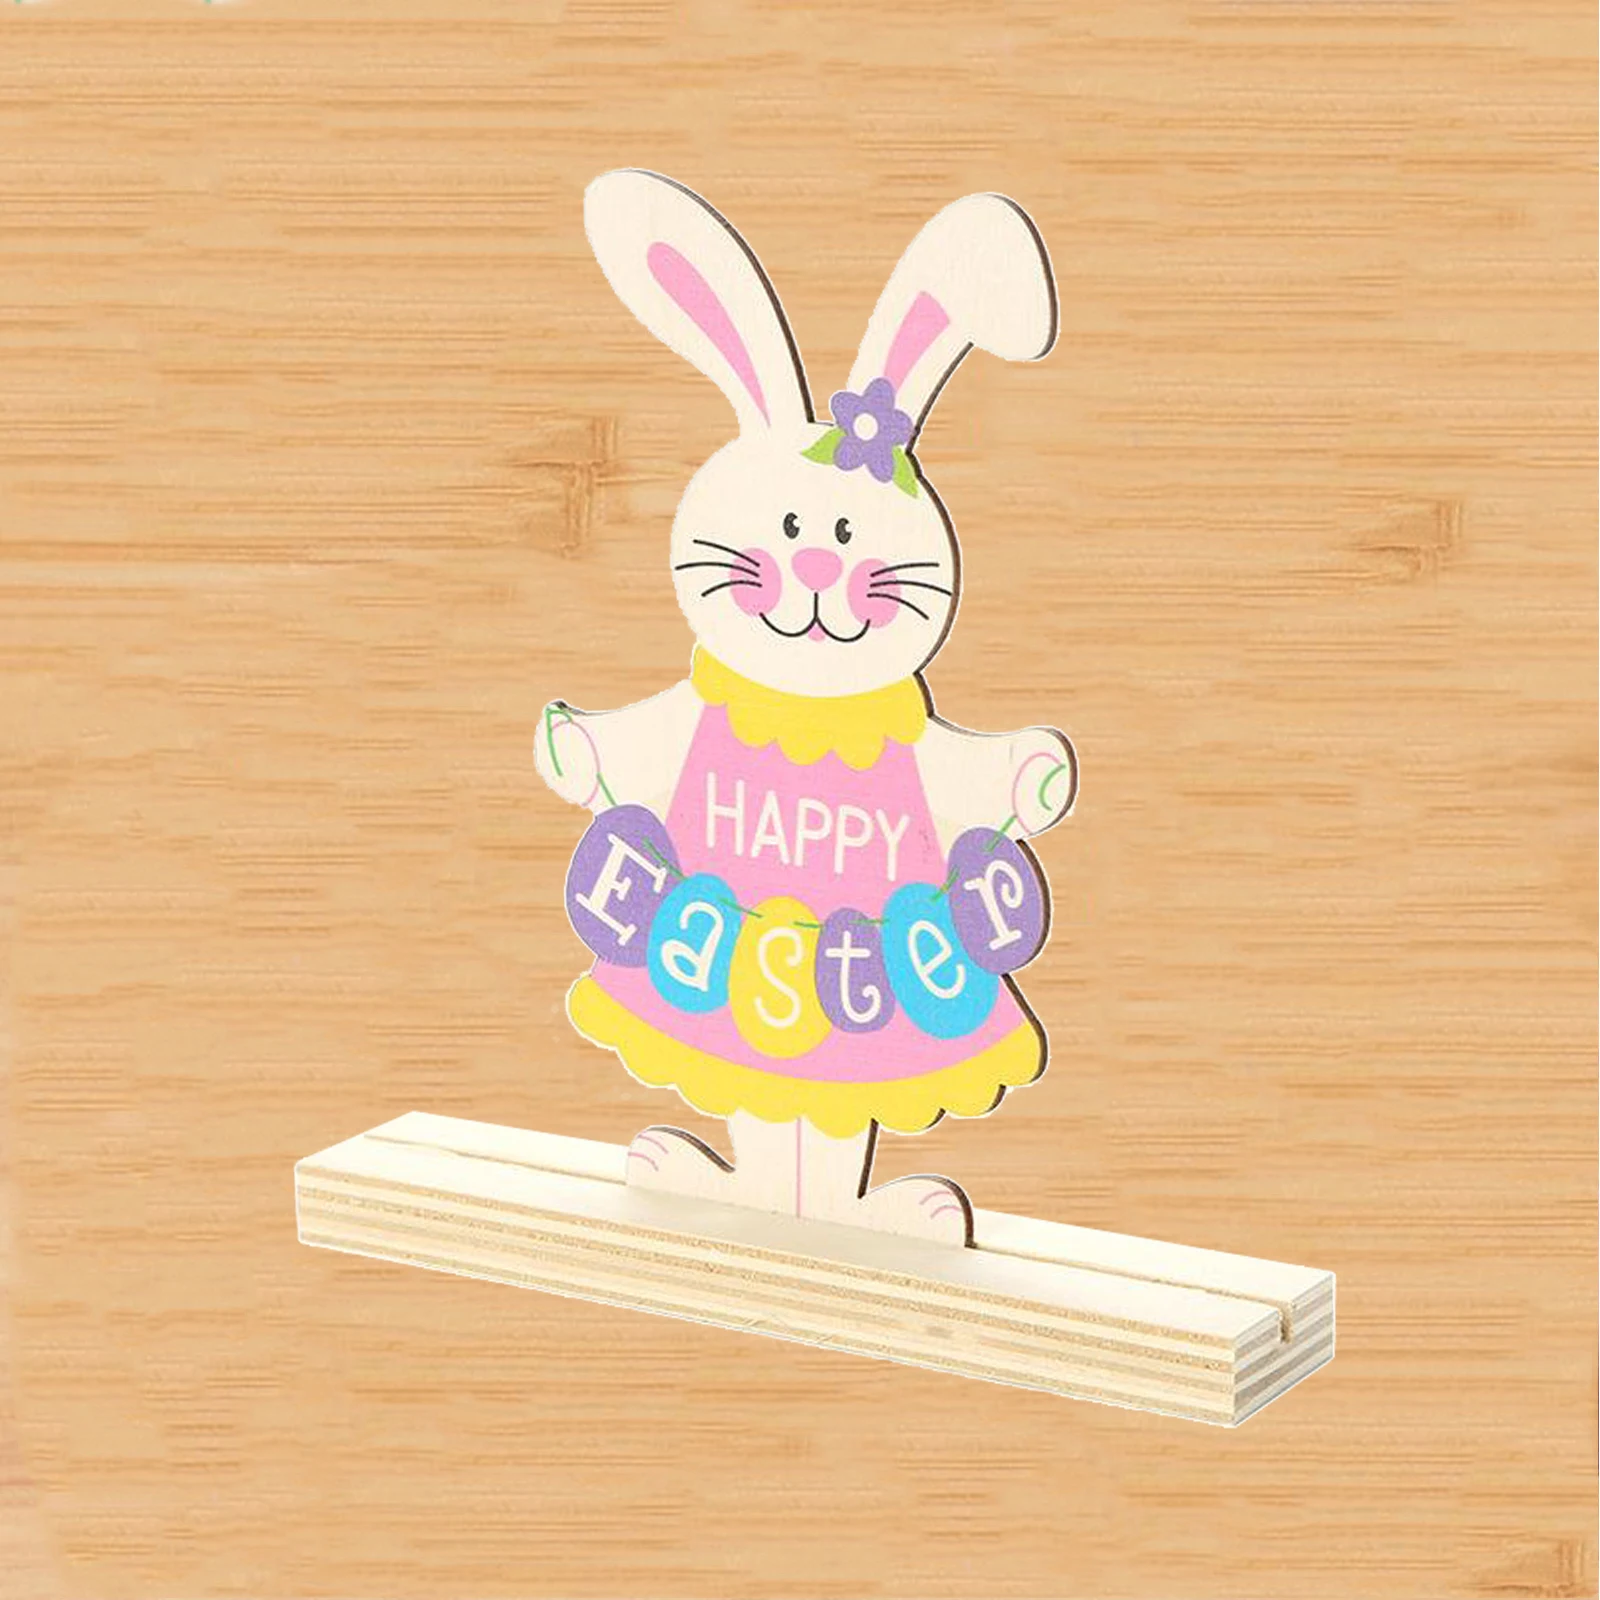 Standing Wooden Easter Bunny Ornament Cut Out Wood Spring Bunny Gifts for Inside Home Party Table Top